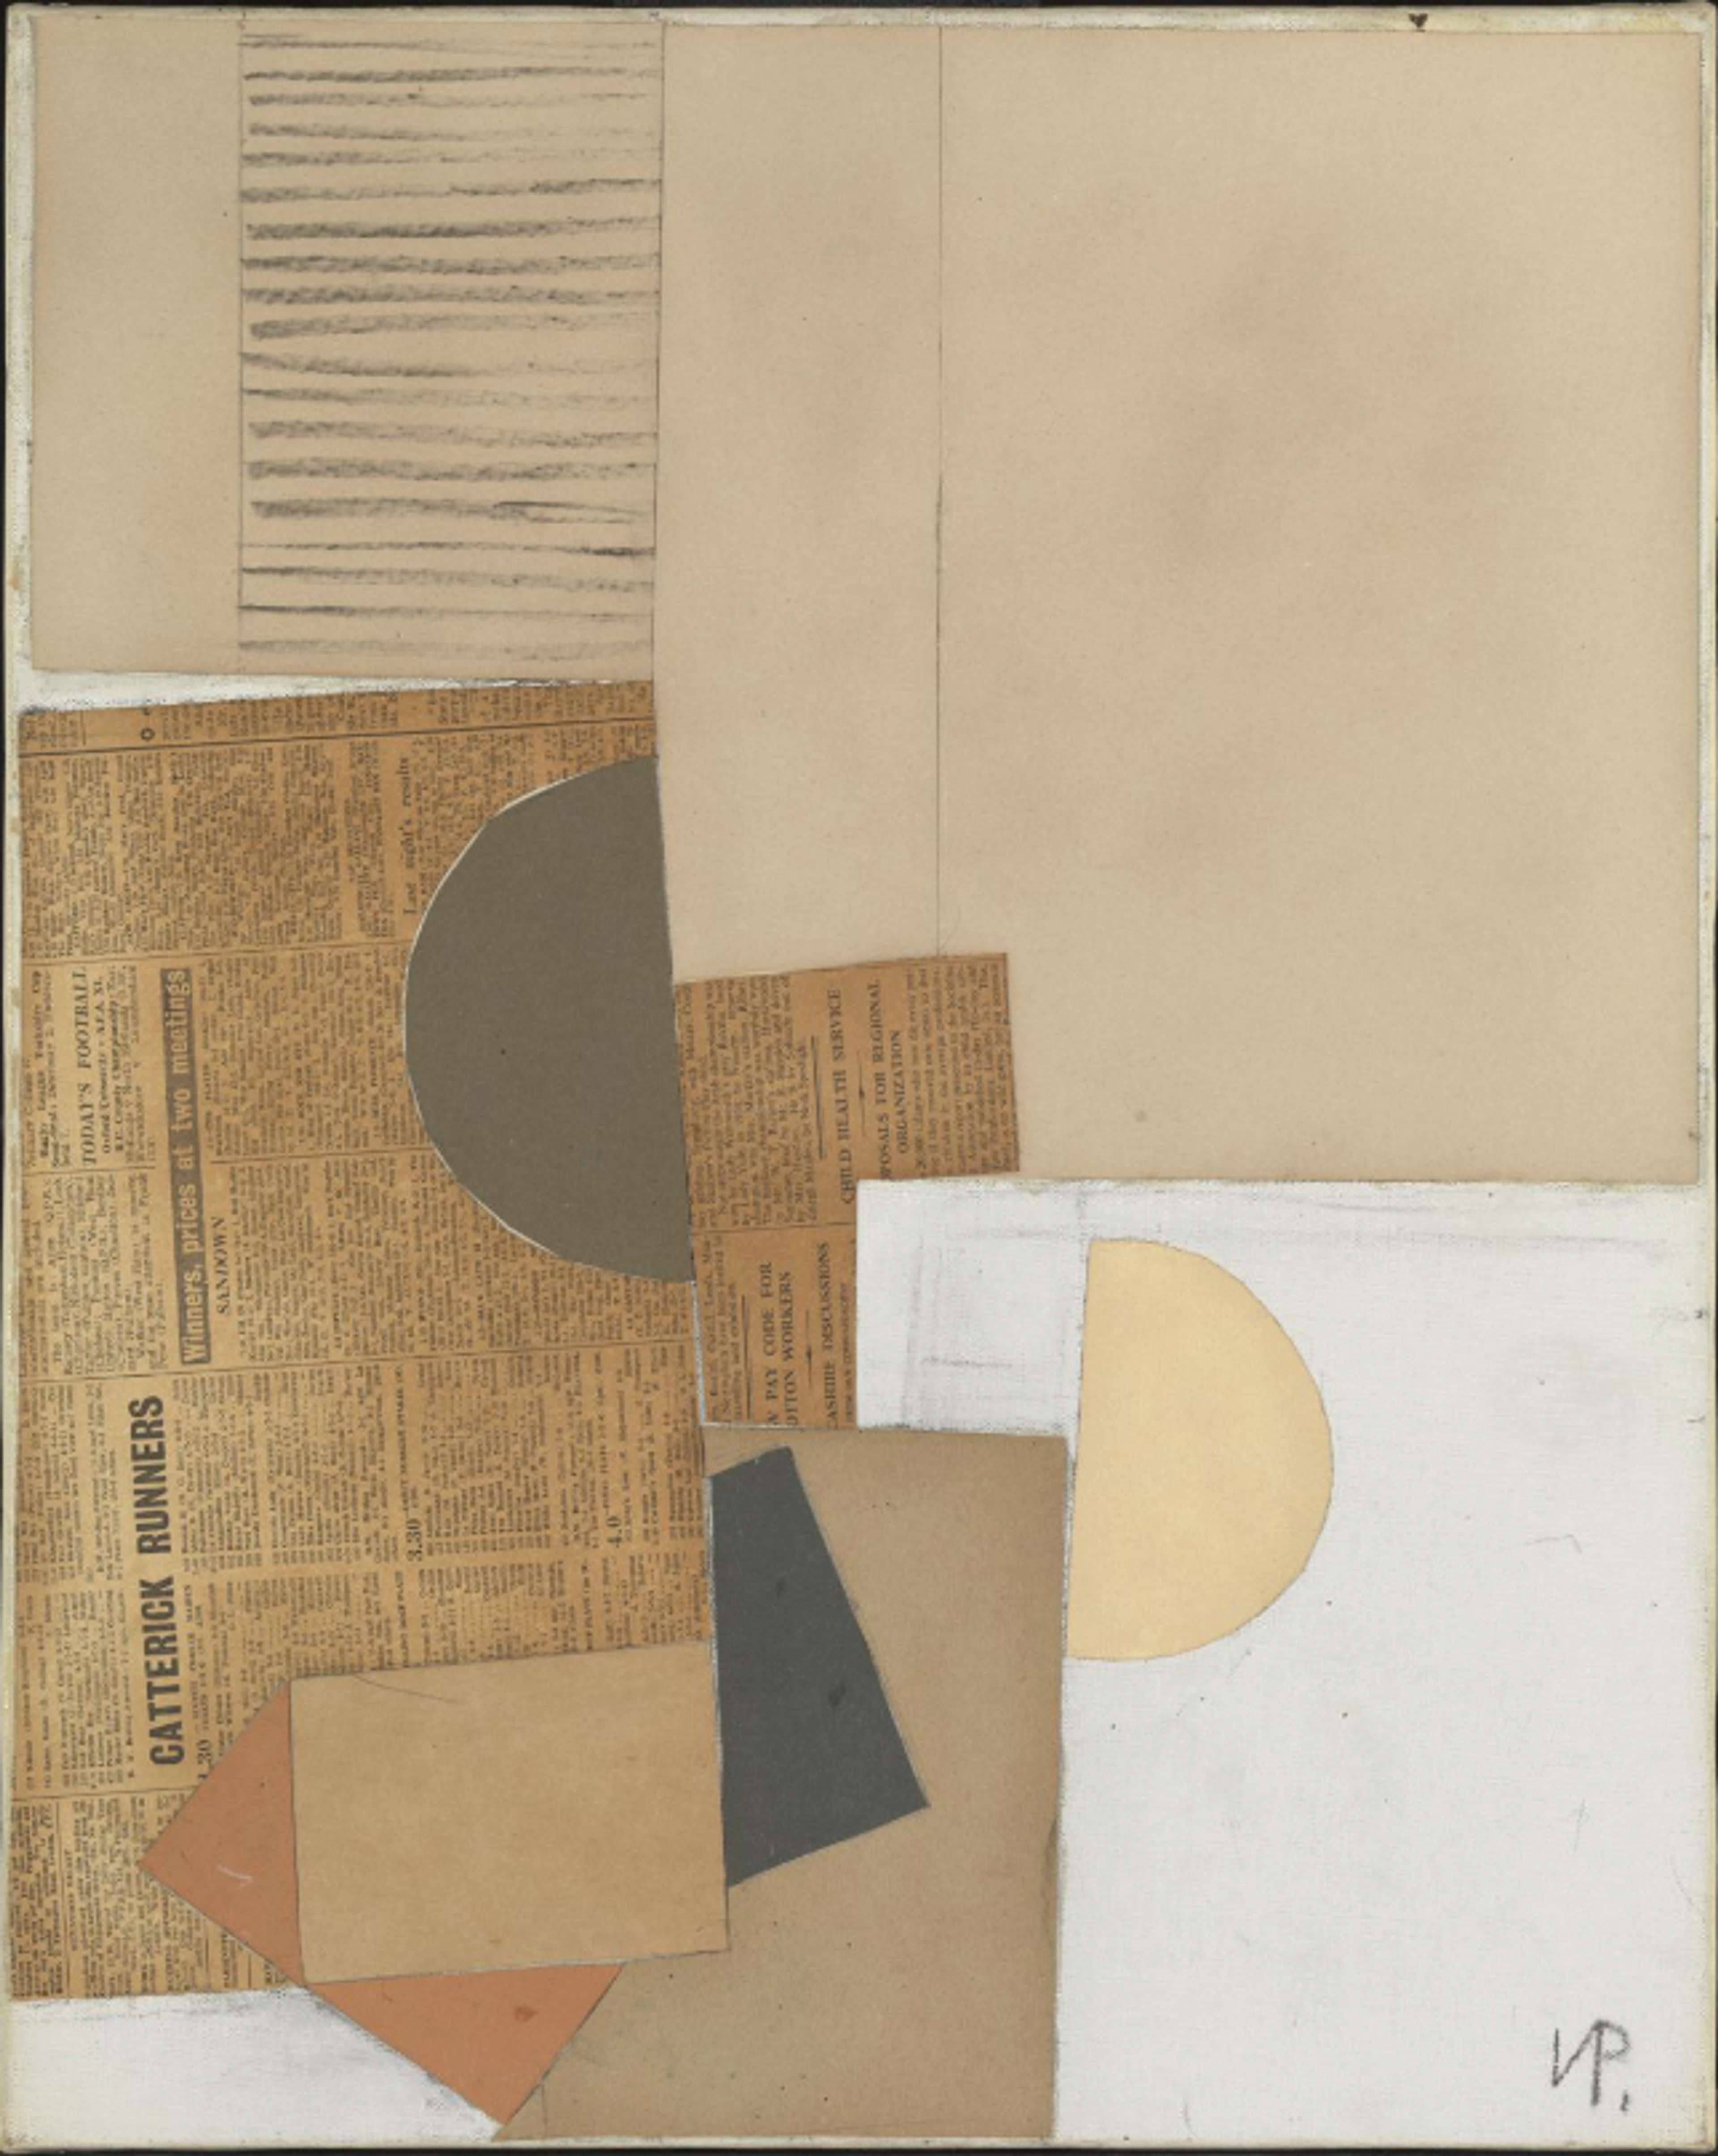 An abstract painting titled "Abstract in White, Grey and Ochre" featuring geometric shapes in shades of white, grey, and ochre set against a black background.